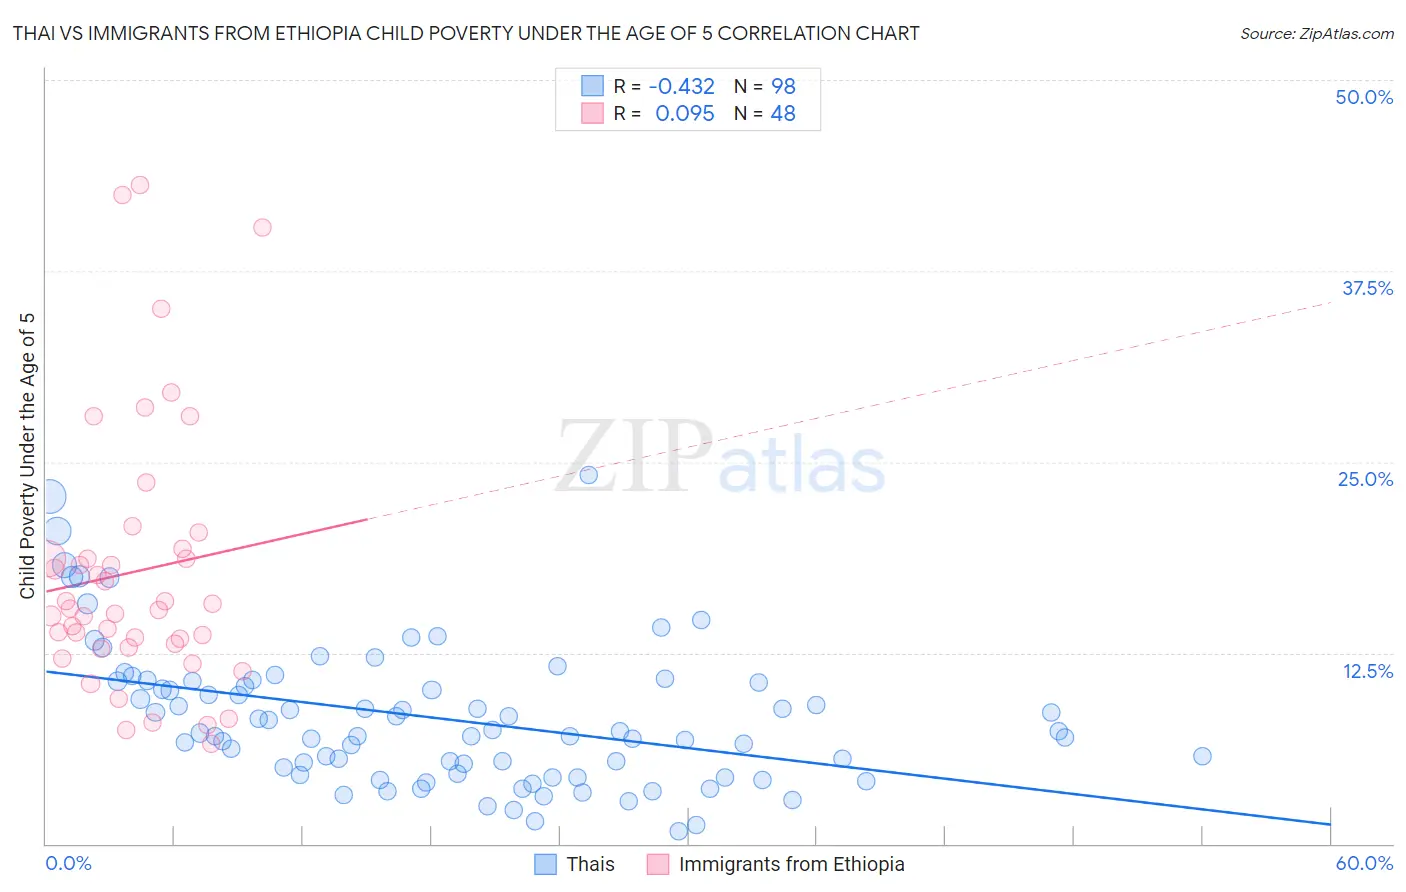 Thai vs Immigrants from Ethiopia Child Poverty Under the Age of 5